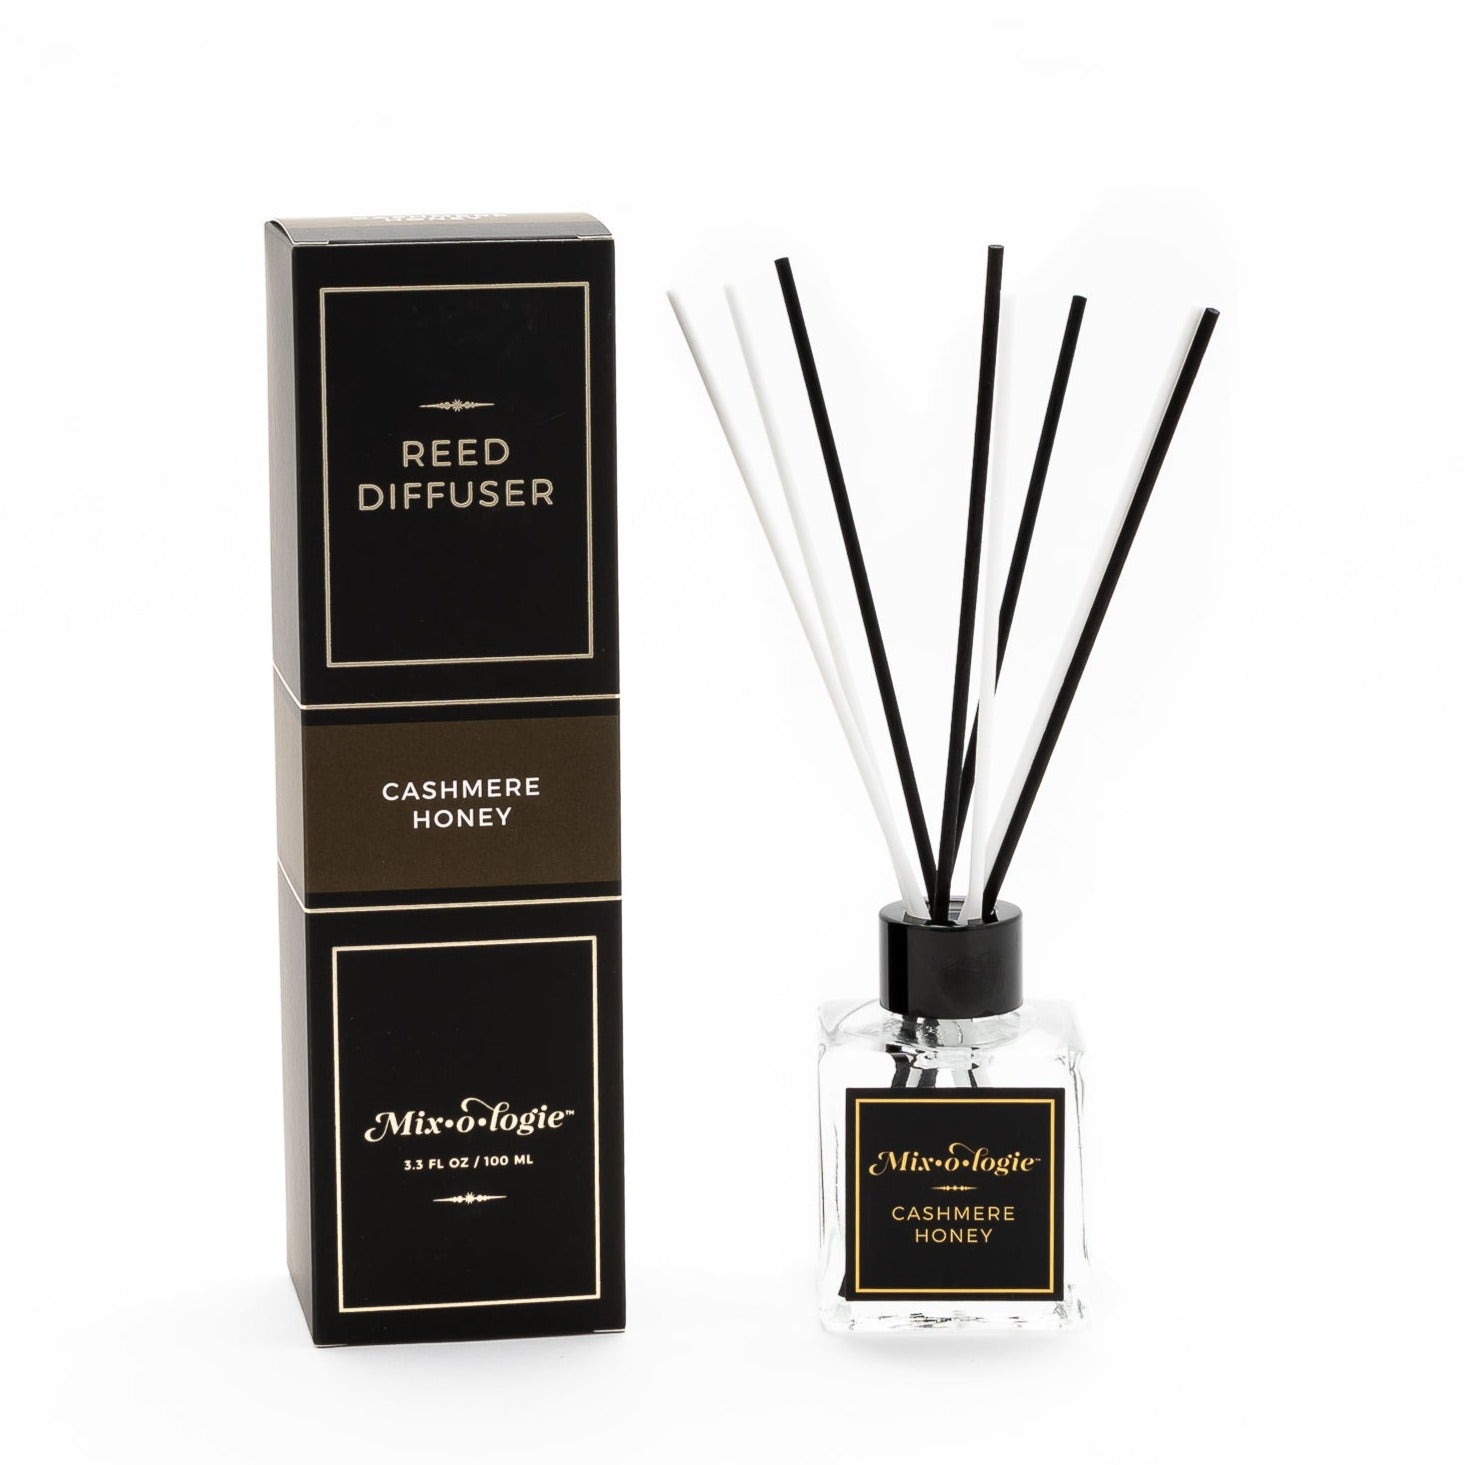 Cashmere Honey Reed Diffuser is a clear square glass container with black label that says Mixologie – Cashmere Honey. Has a black top and 4 white & 4 black reed sticks coming out of top, is 3.3 fl oz or 100 mL of clear scented liquid. Black rectangle package box with brown label. Box and diffuser are pictured with white background